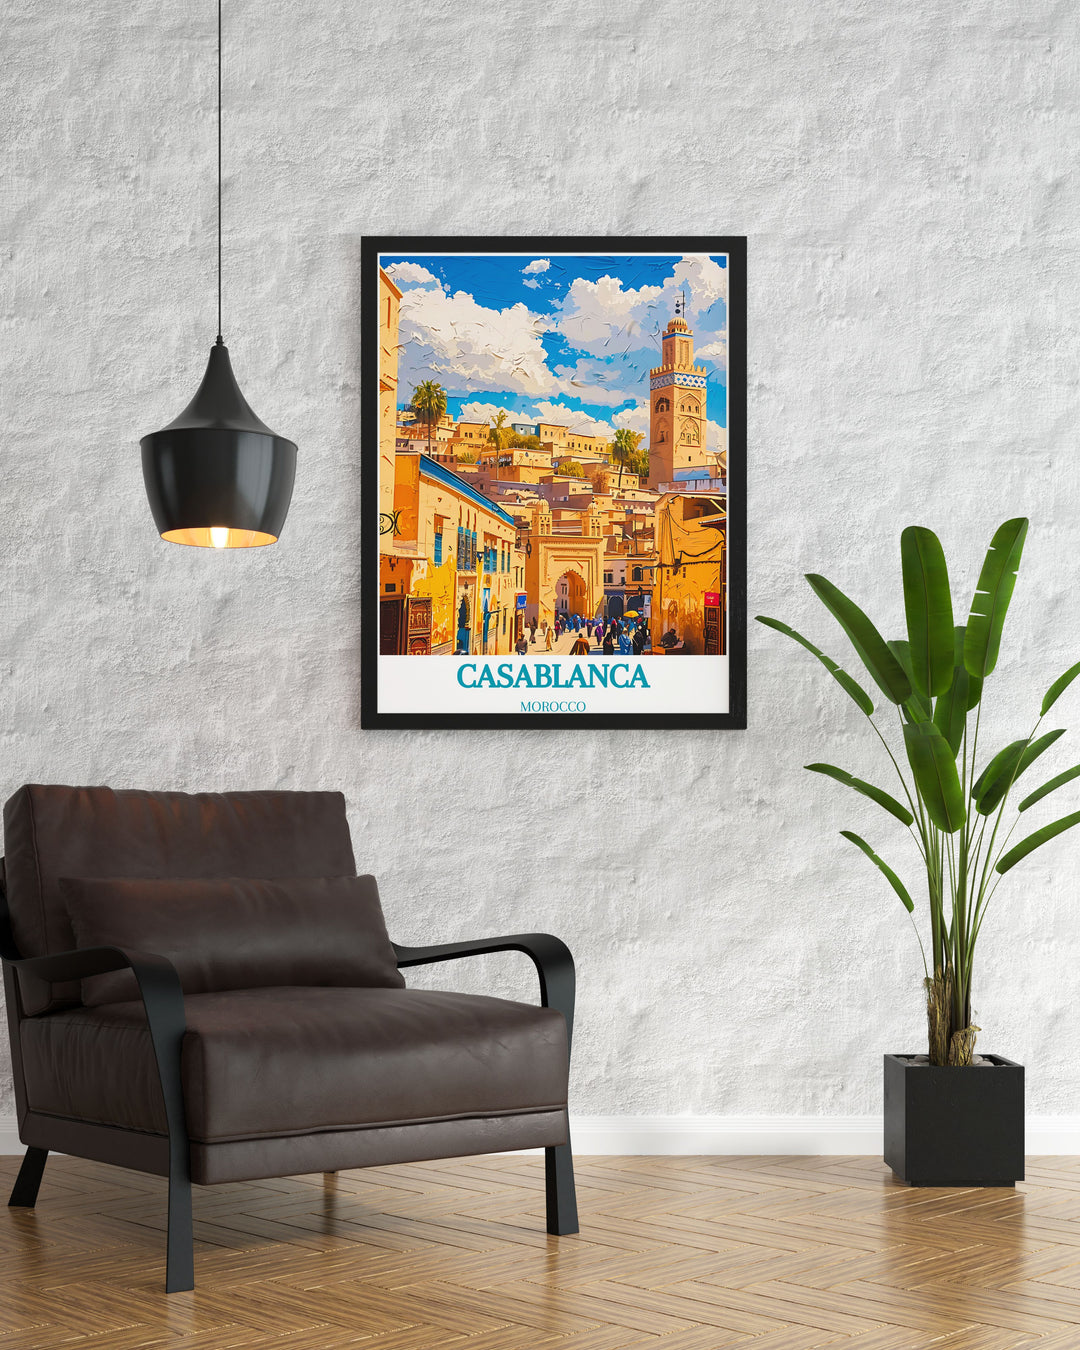 This poster artfully depicts Old Medina and its role as a central landmark in Casablanca, offering a perfect blend of historic marvels and urban landscapes for your decor.